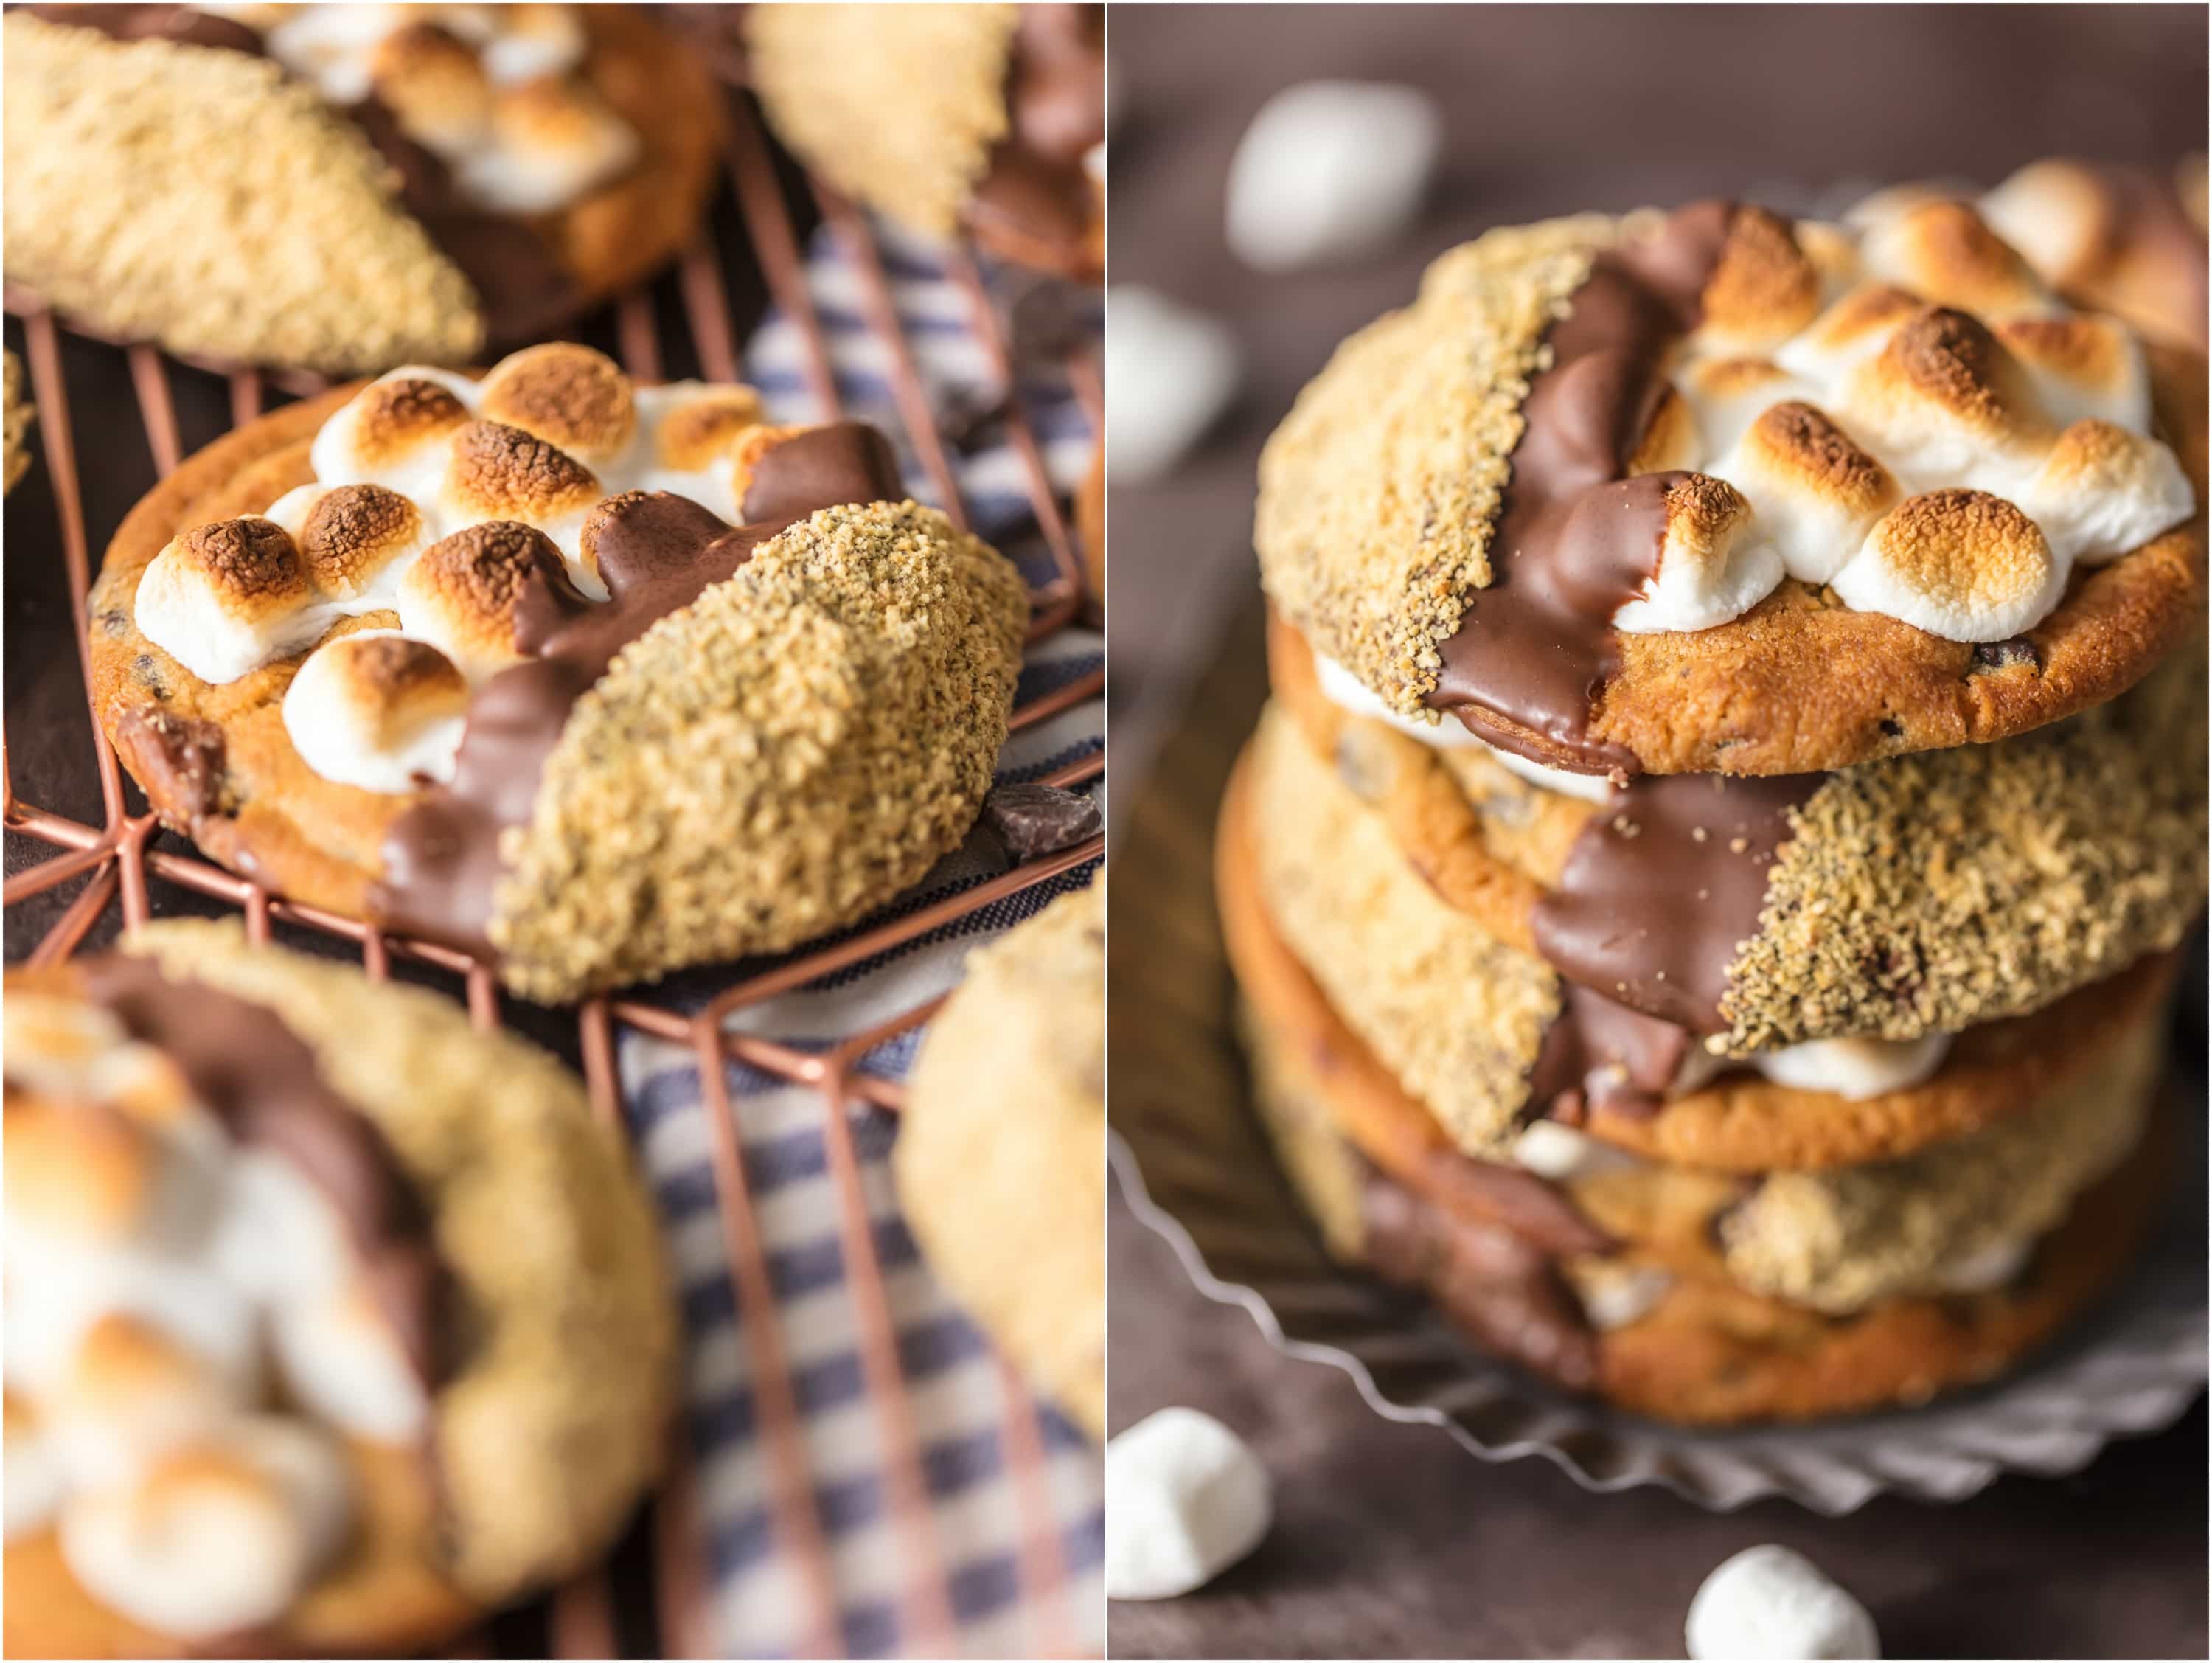 stacks of smores cookies with marshmallows, chocolate, and graham cracker crumbs